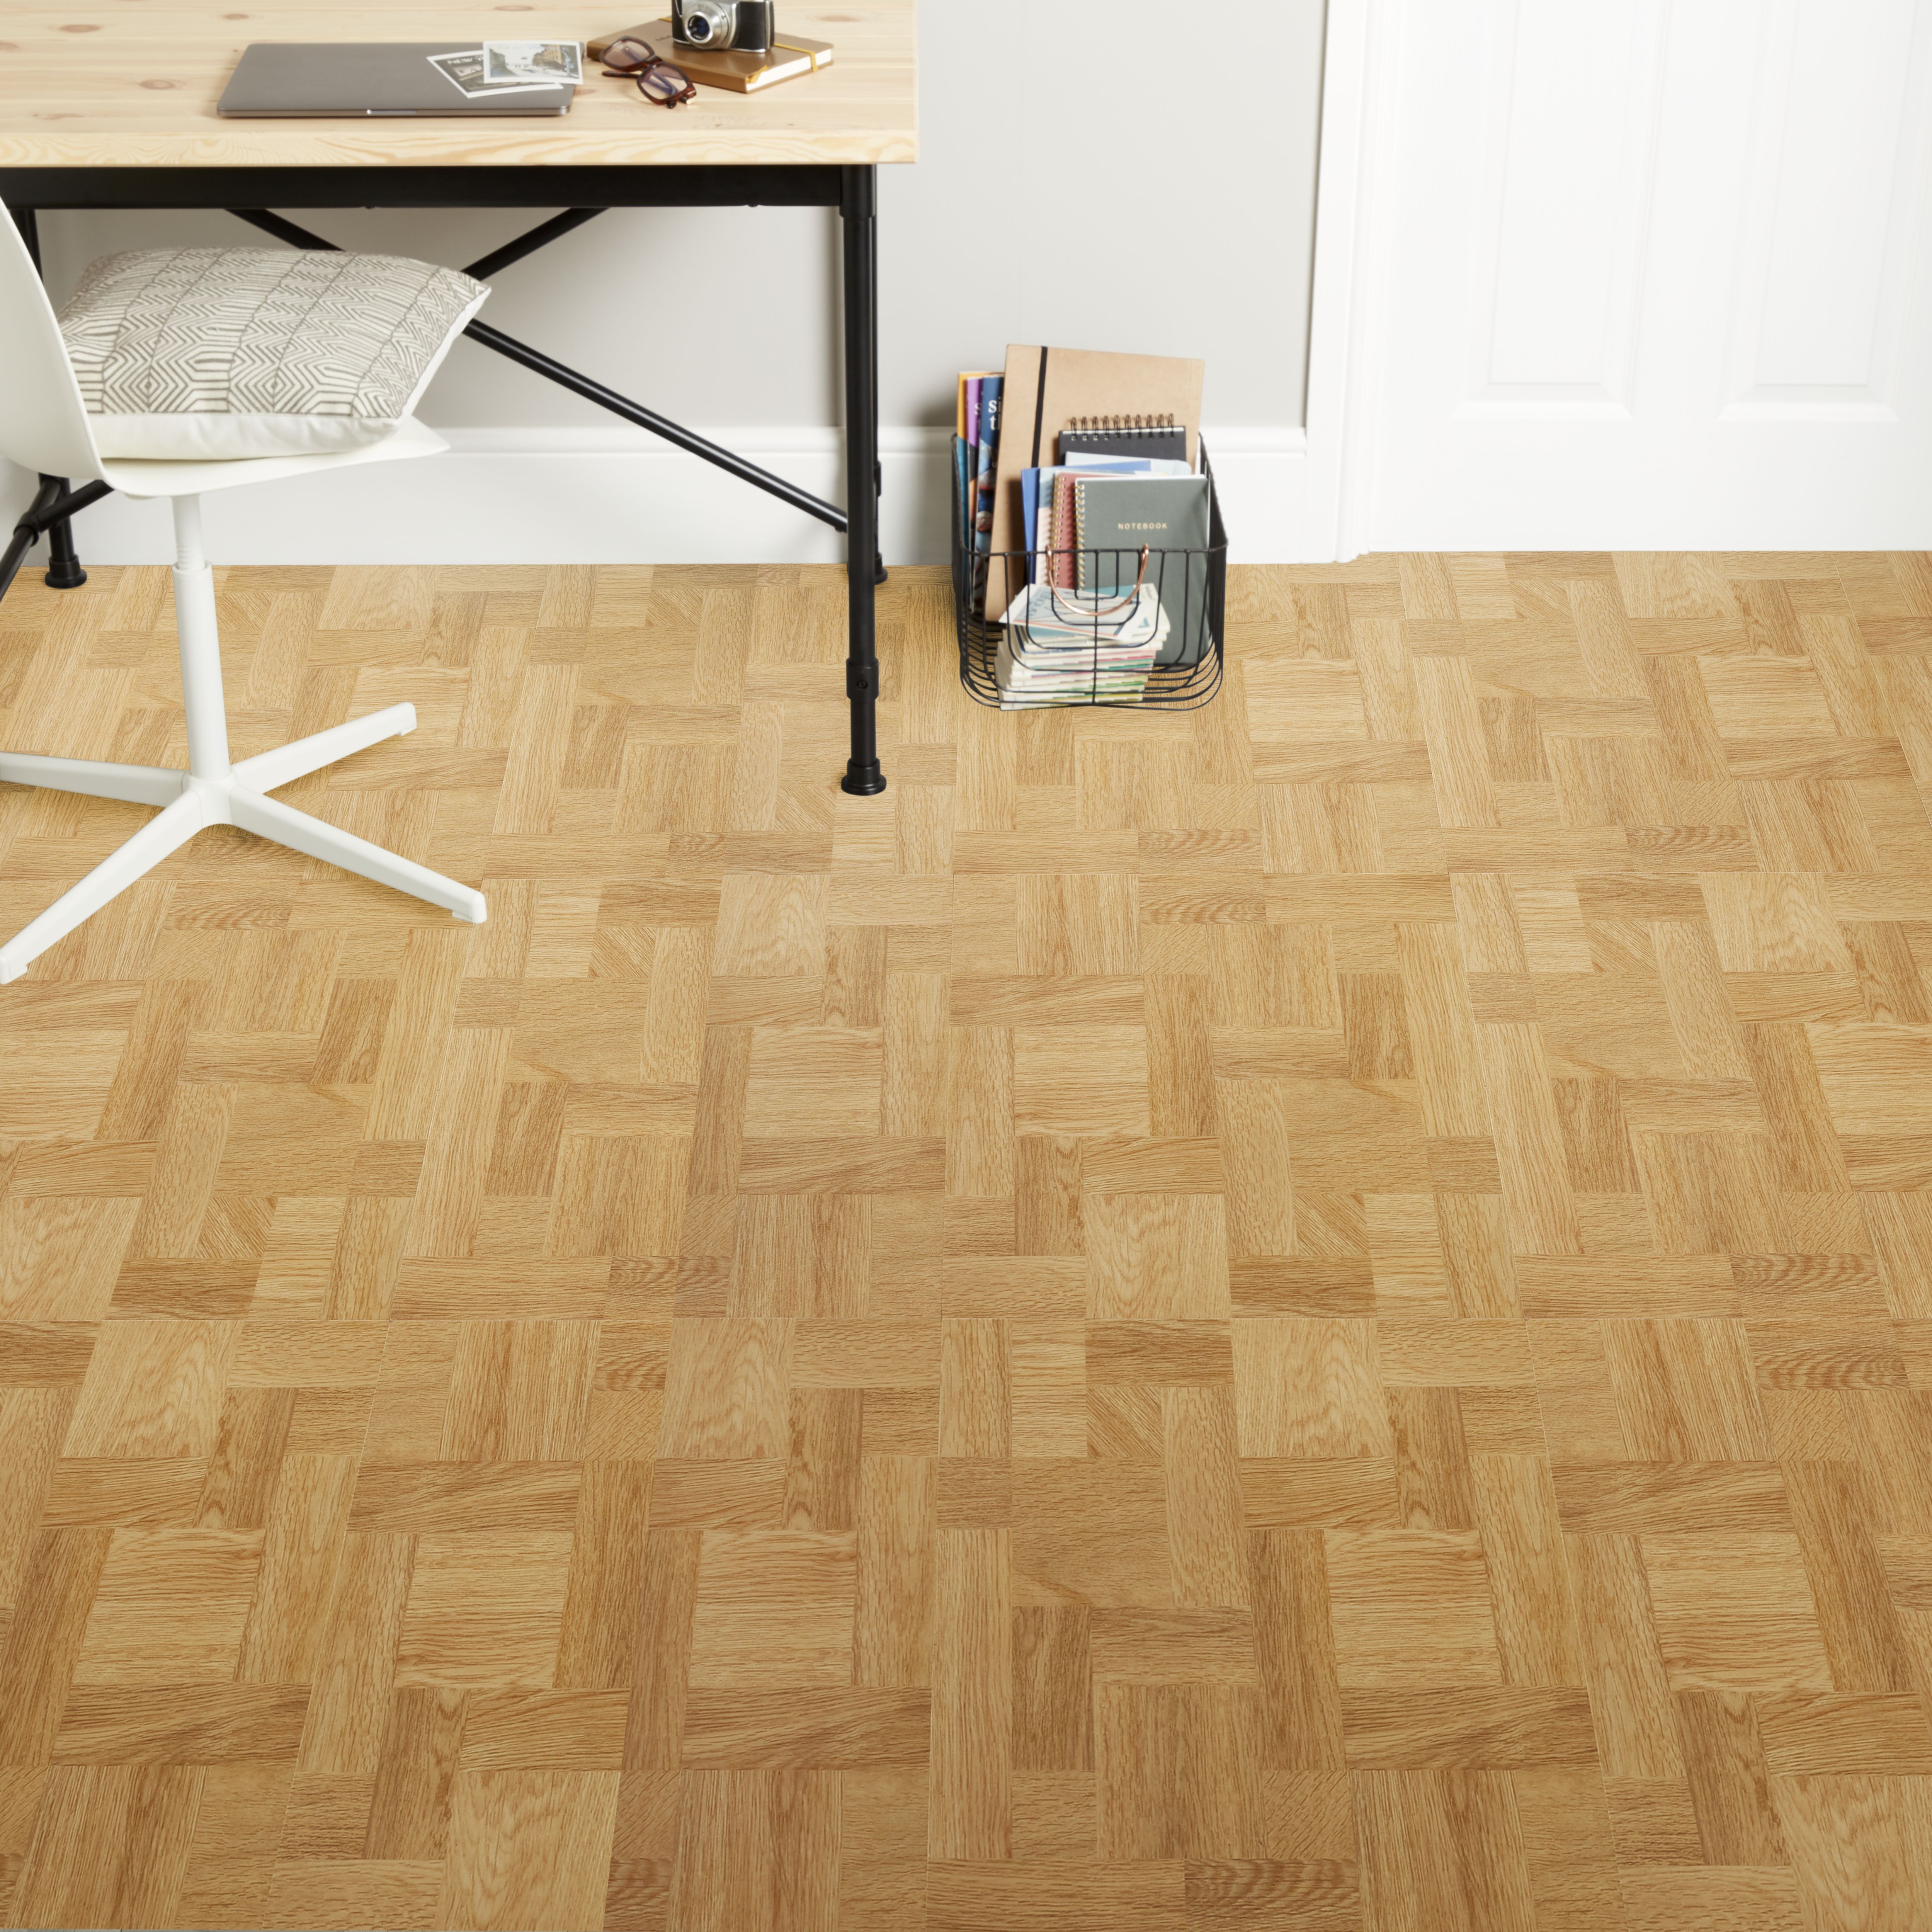 GoodHome Natural Parquet effect Self-adhesive Vinyl tile, Pack of 13